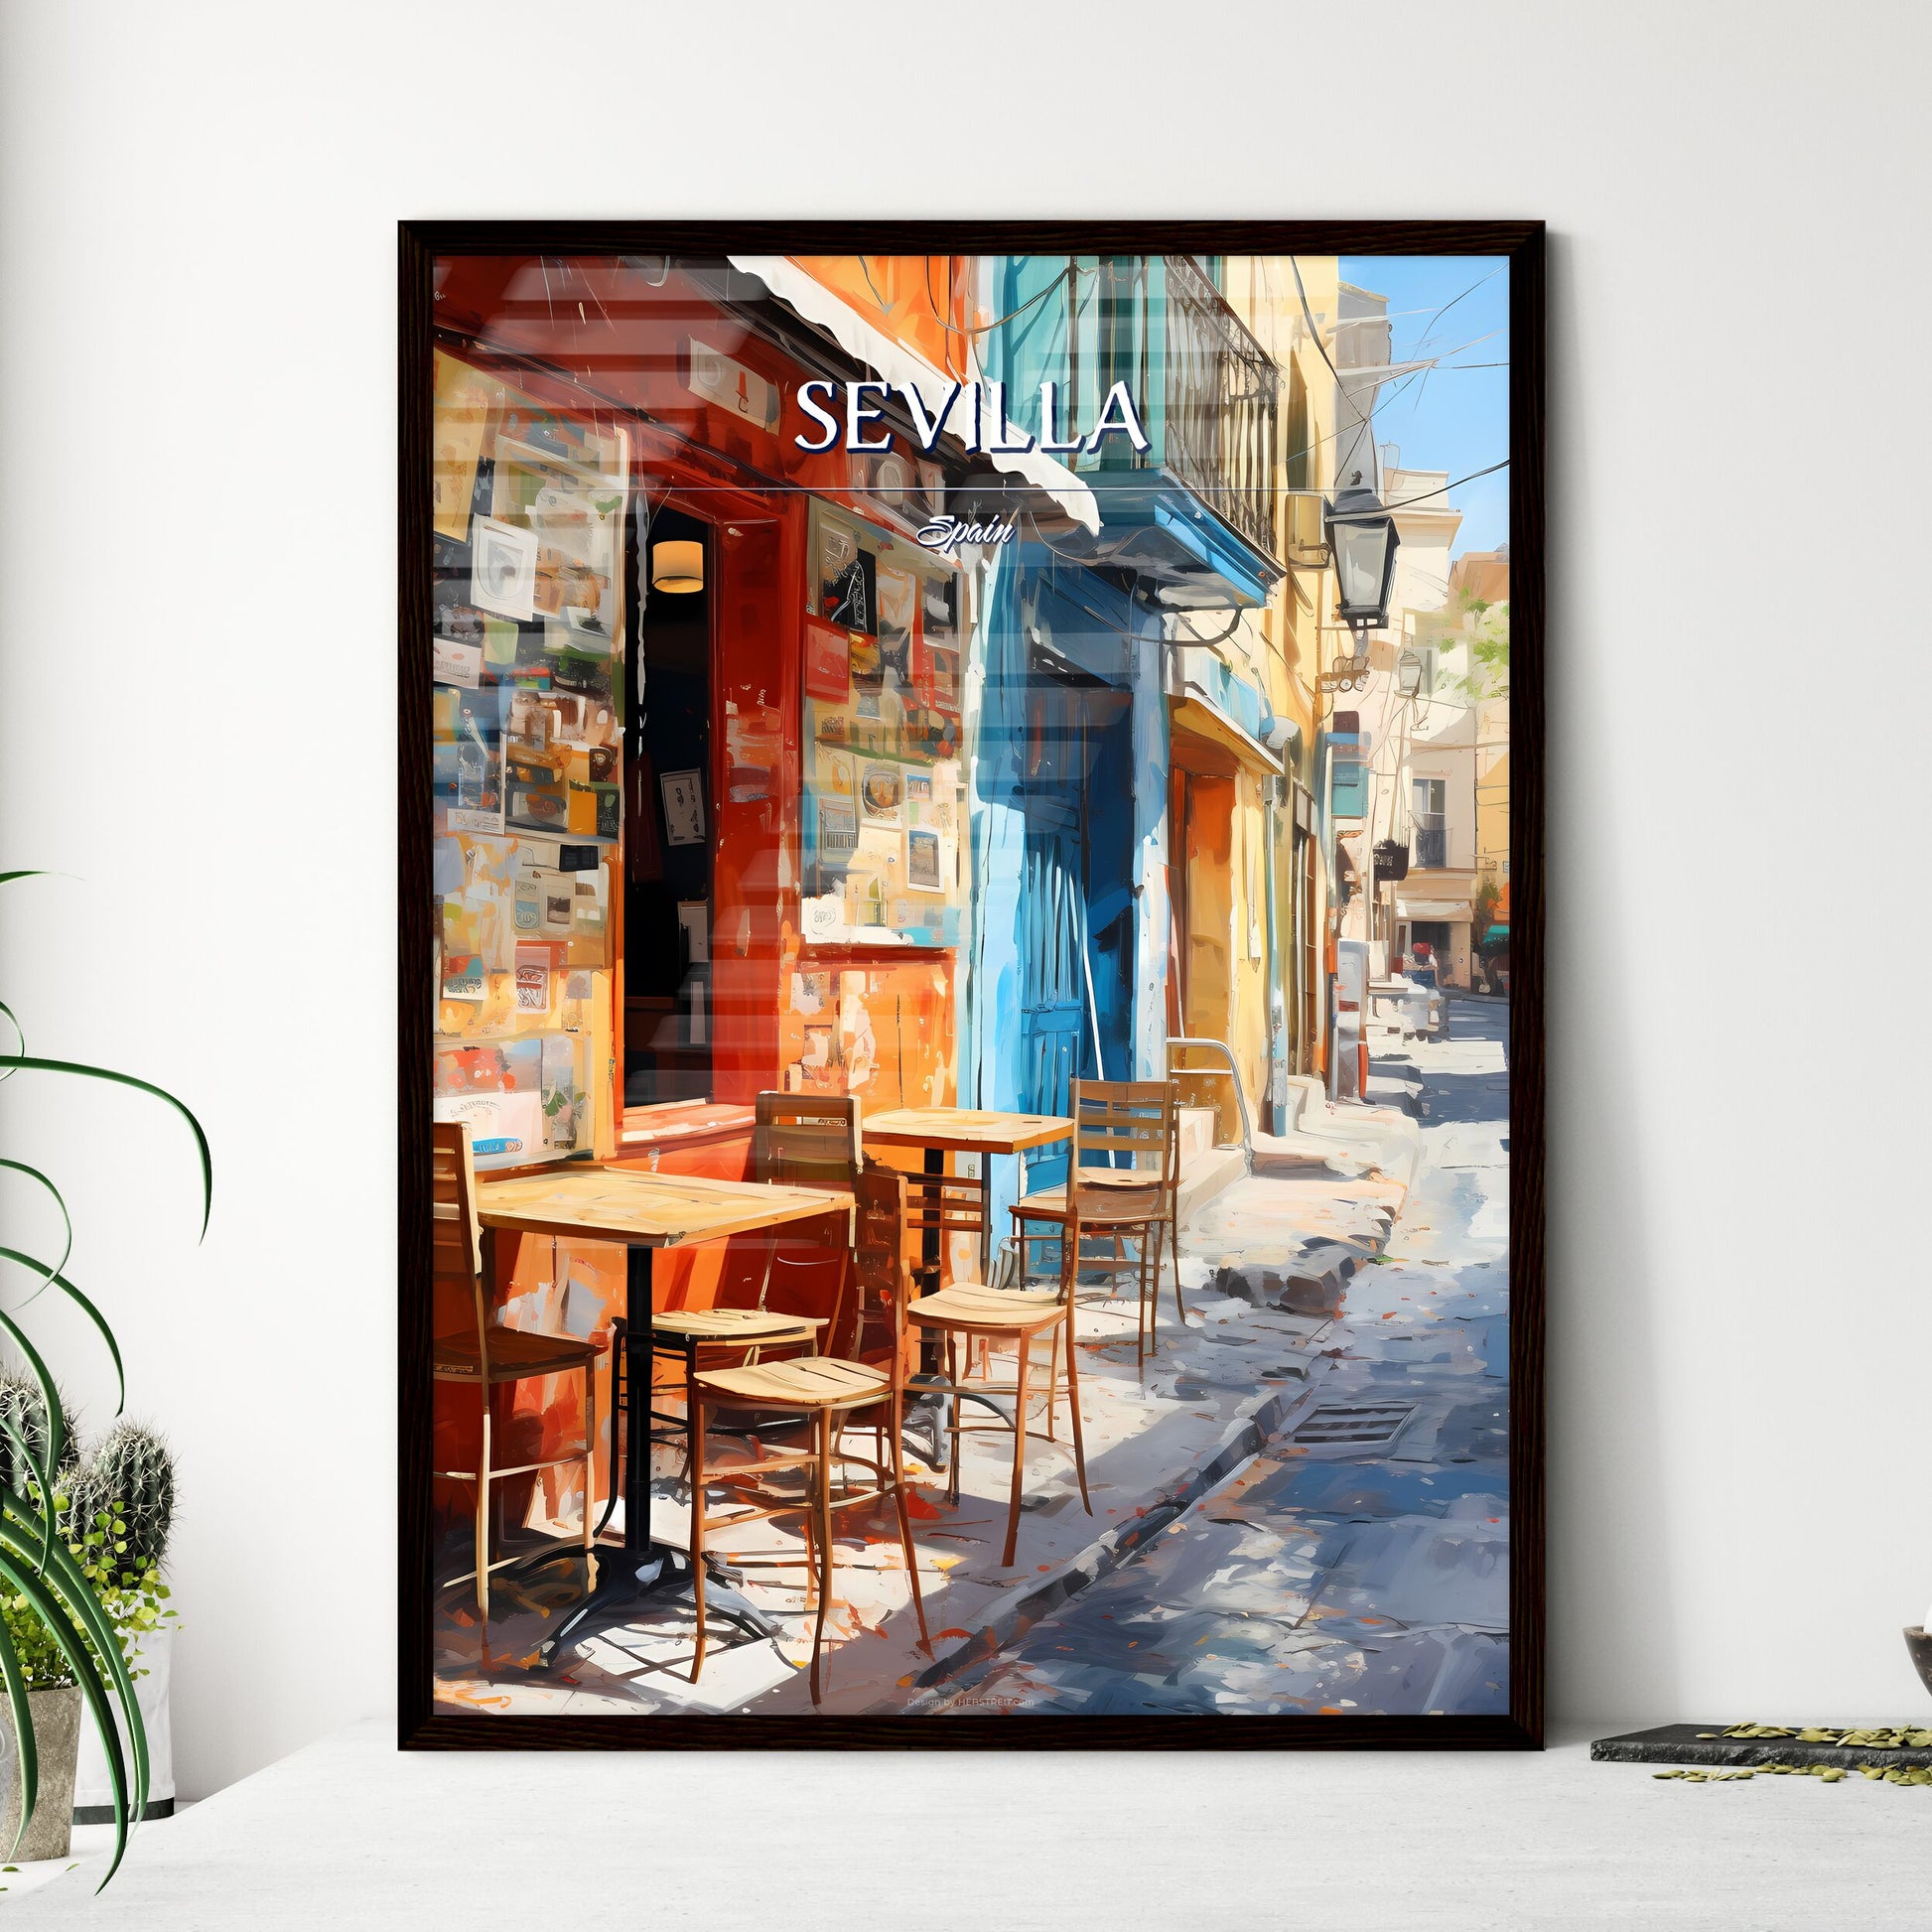 Sevilla, Spain - Art print of a street with tables and chairs Default Title